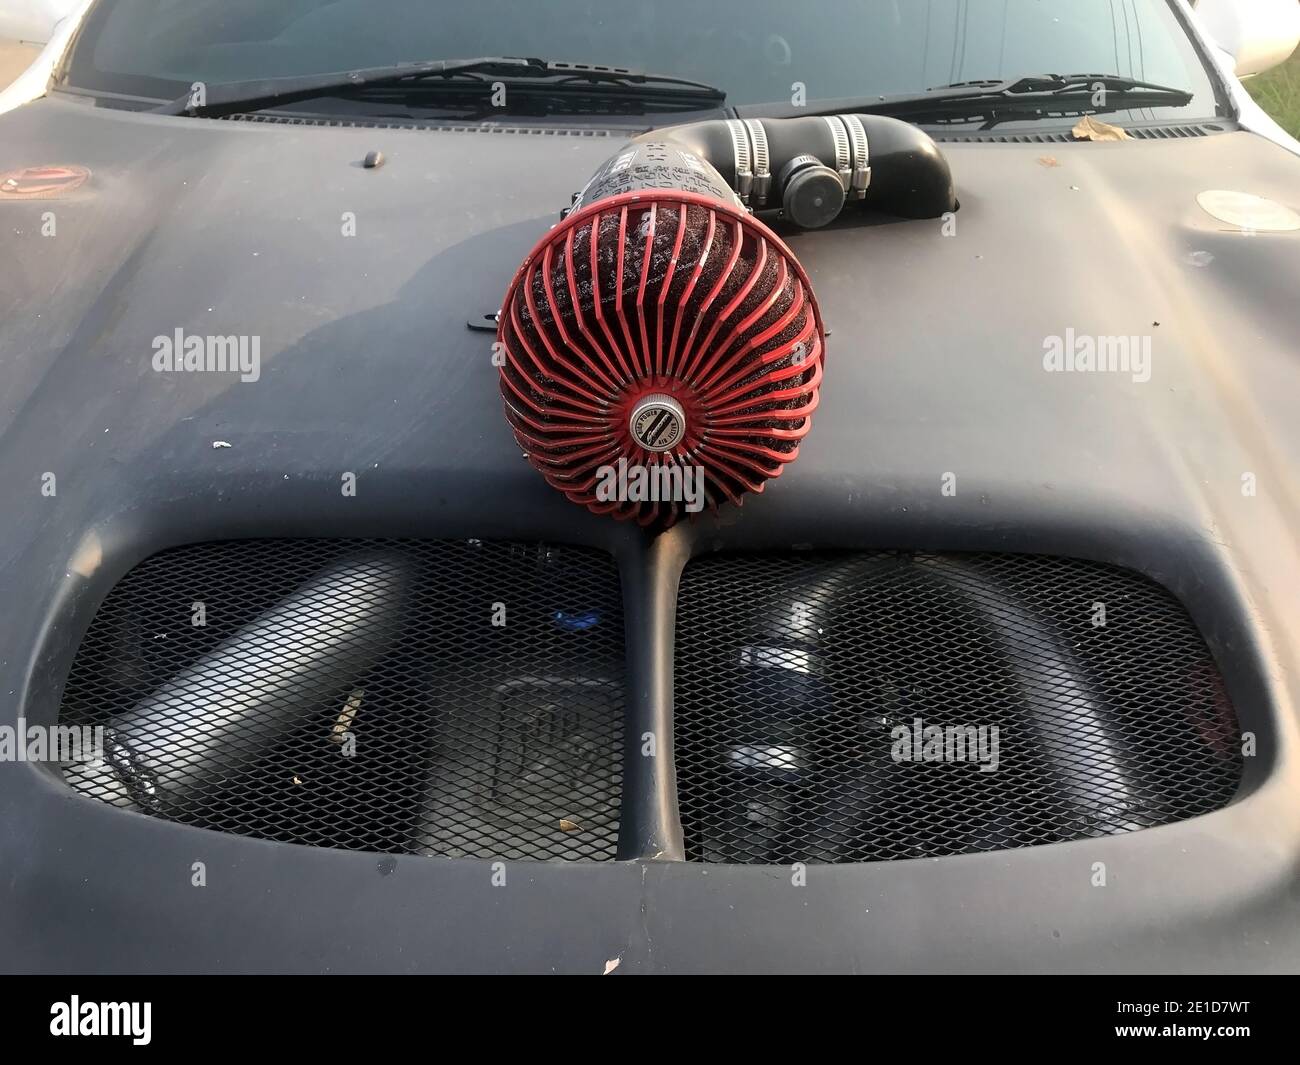 SAMUT PRAKAN, THAILAND, FEB 07 2020, The front hood of a sports car with  attached air filter Stock Photo - Alamy